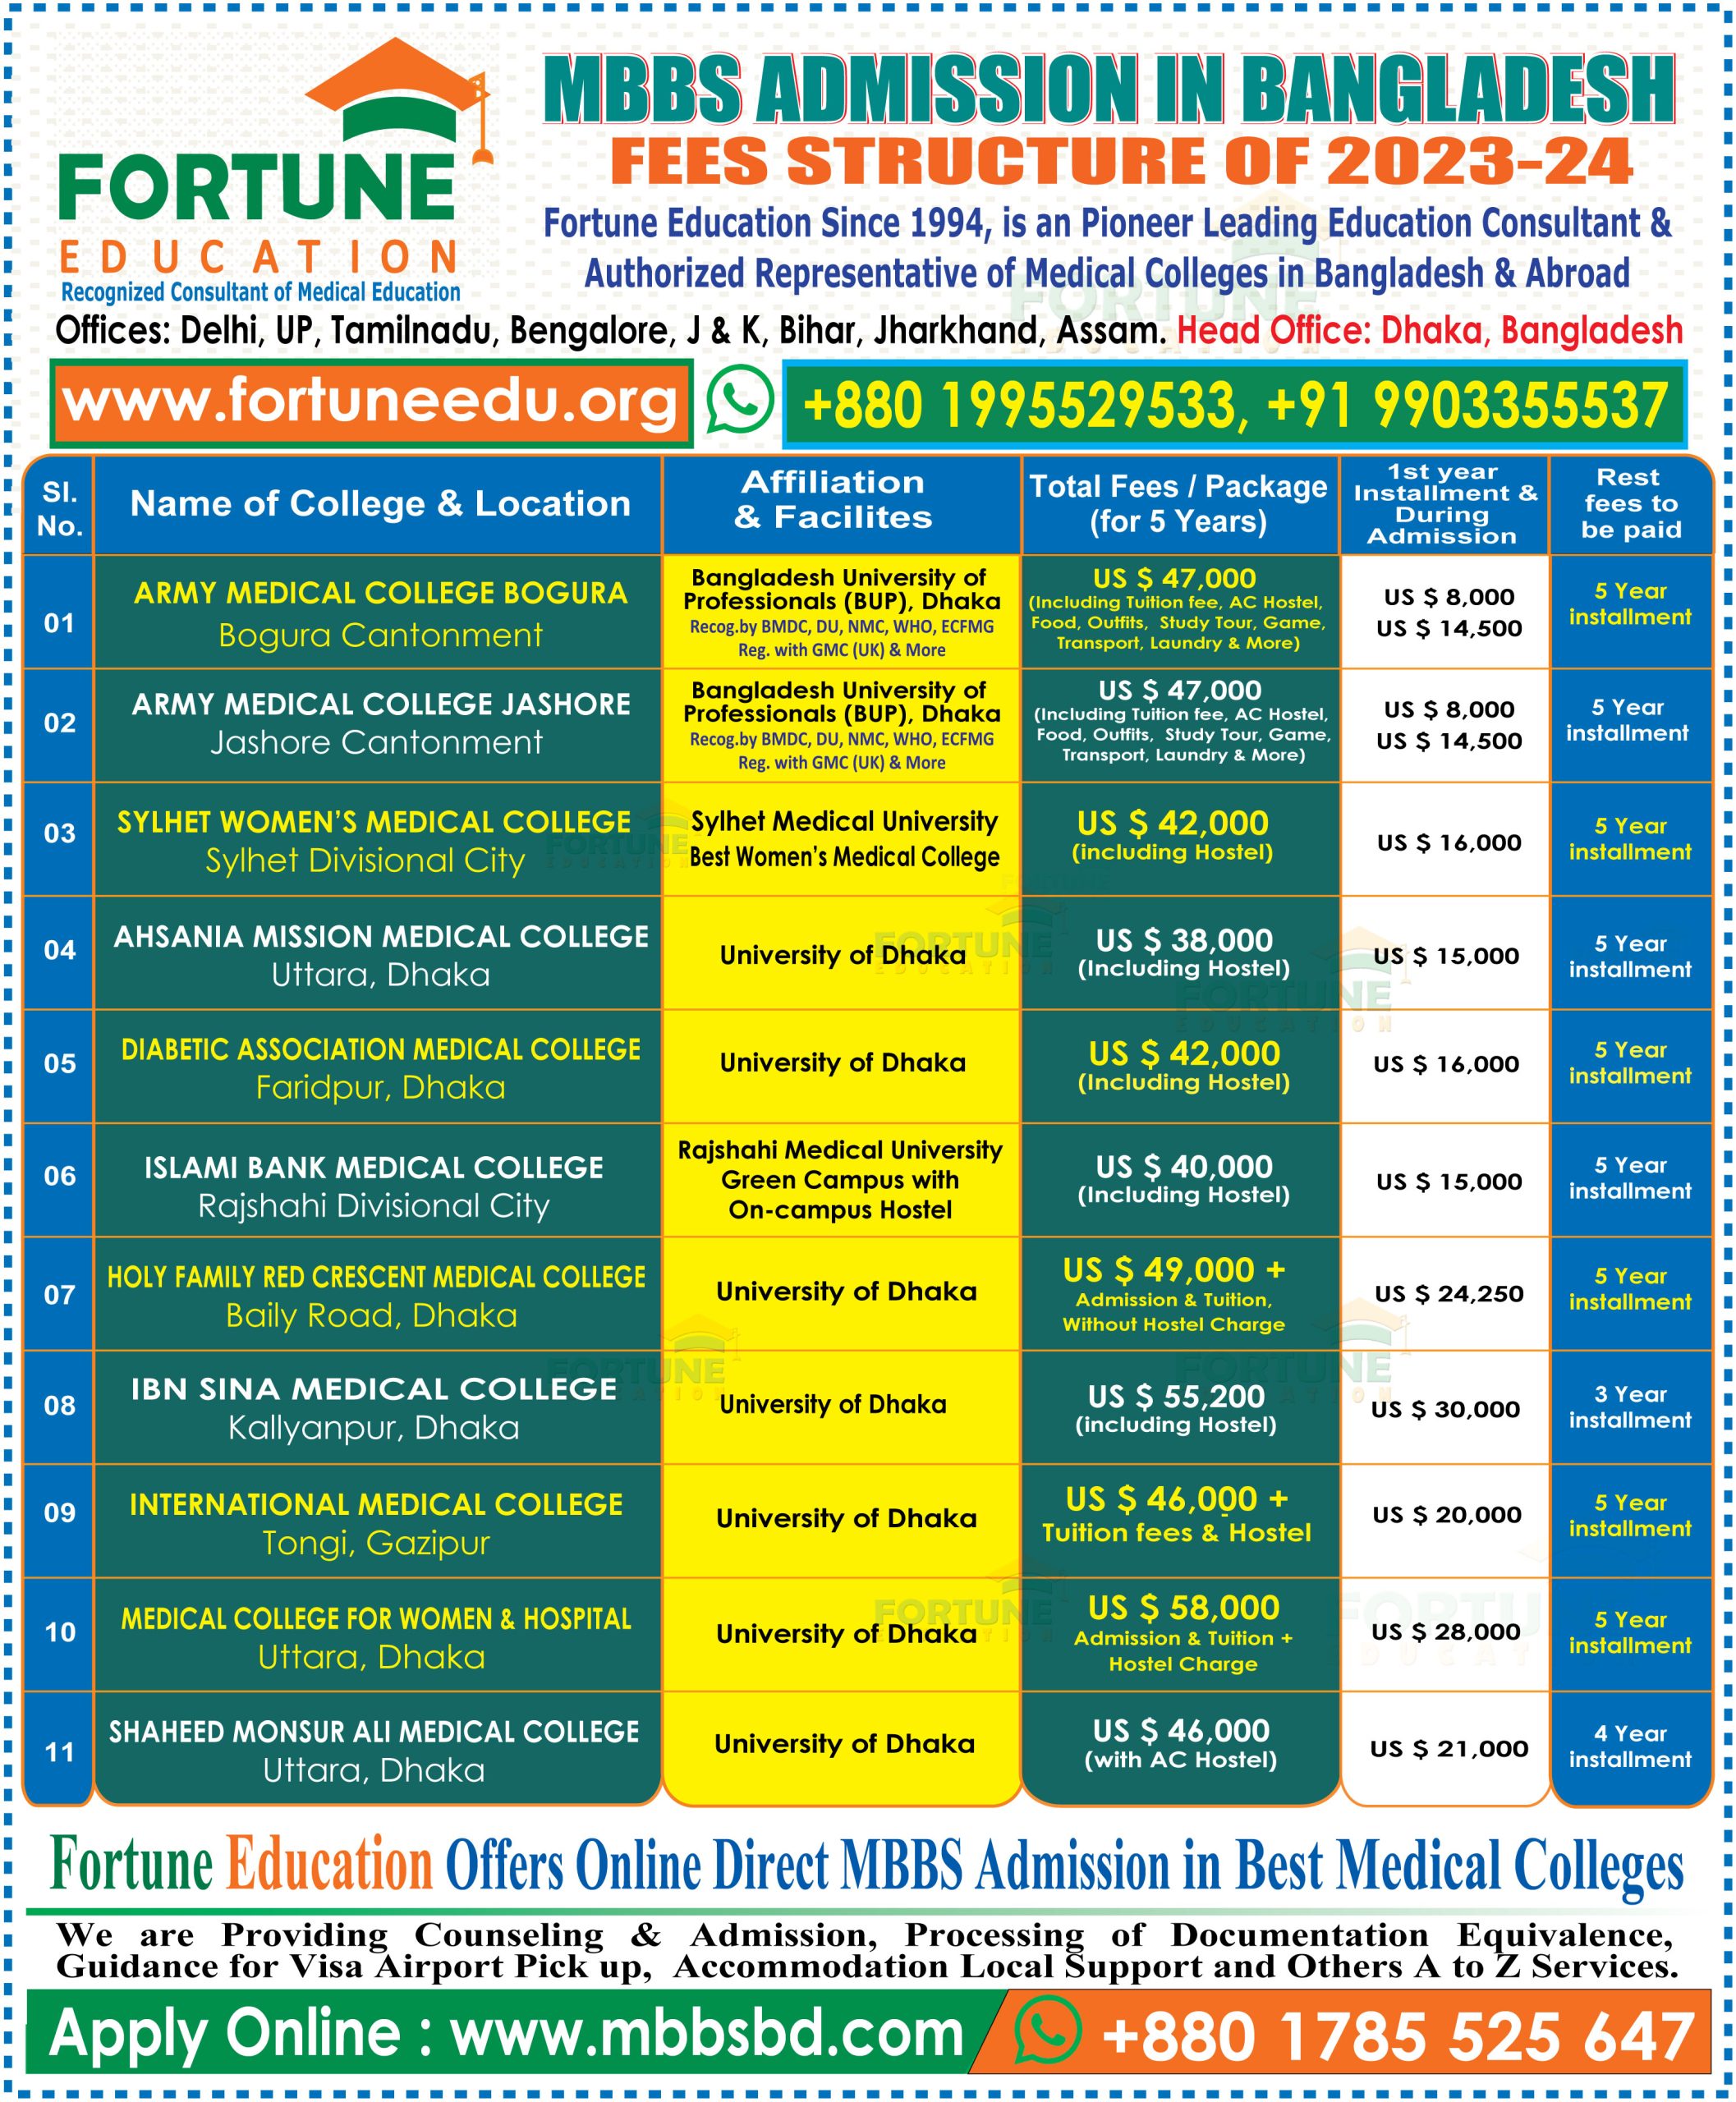 MBBS FEES STRUCTURE IN BANGLADESH